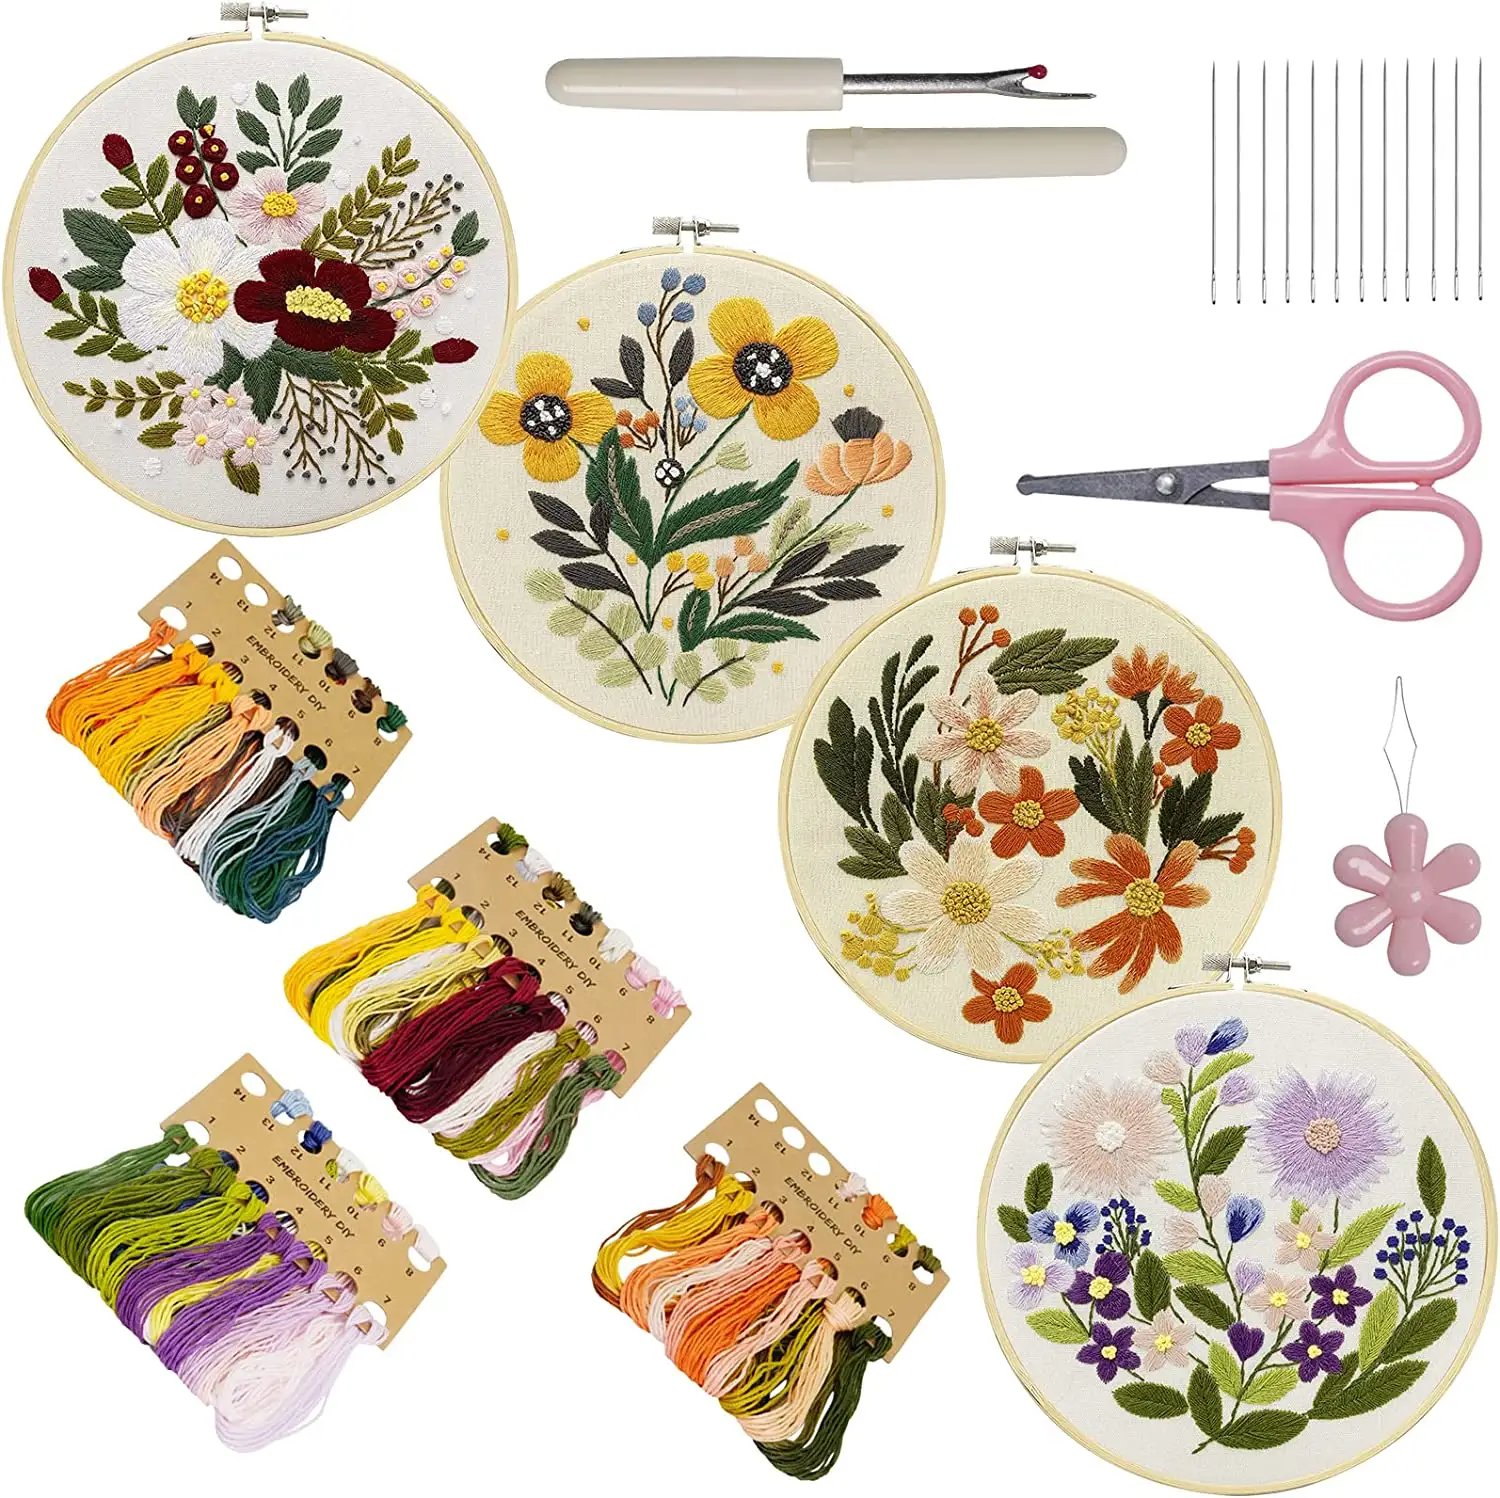 Microstar Handmade Embroidery Floral Embroidery Kit for Beginners DIY Embroidery Hoops Threads 4Sets DIY Stamped Sewing Starter